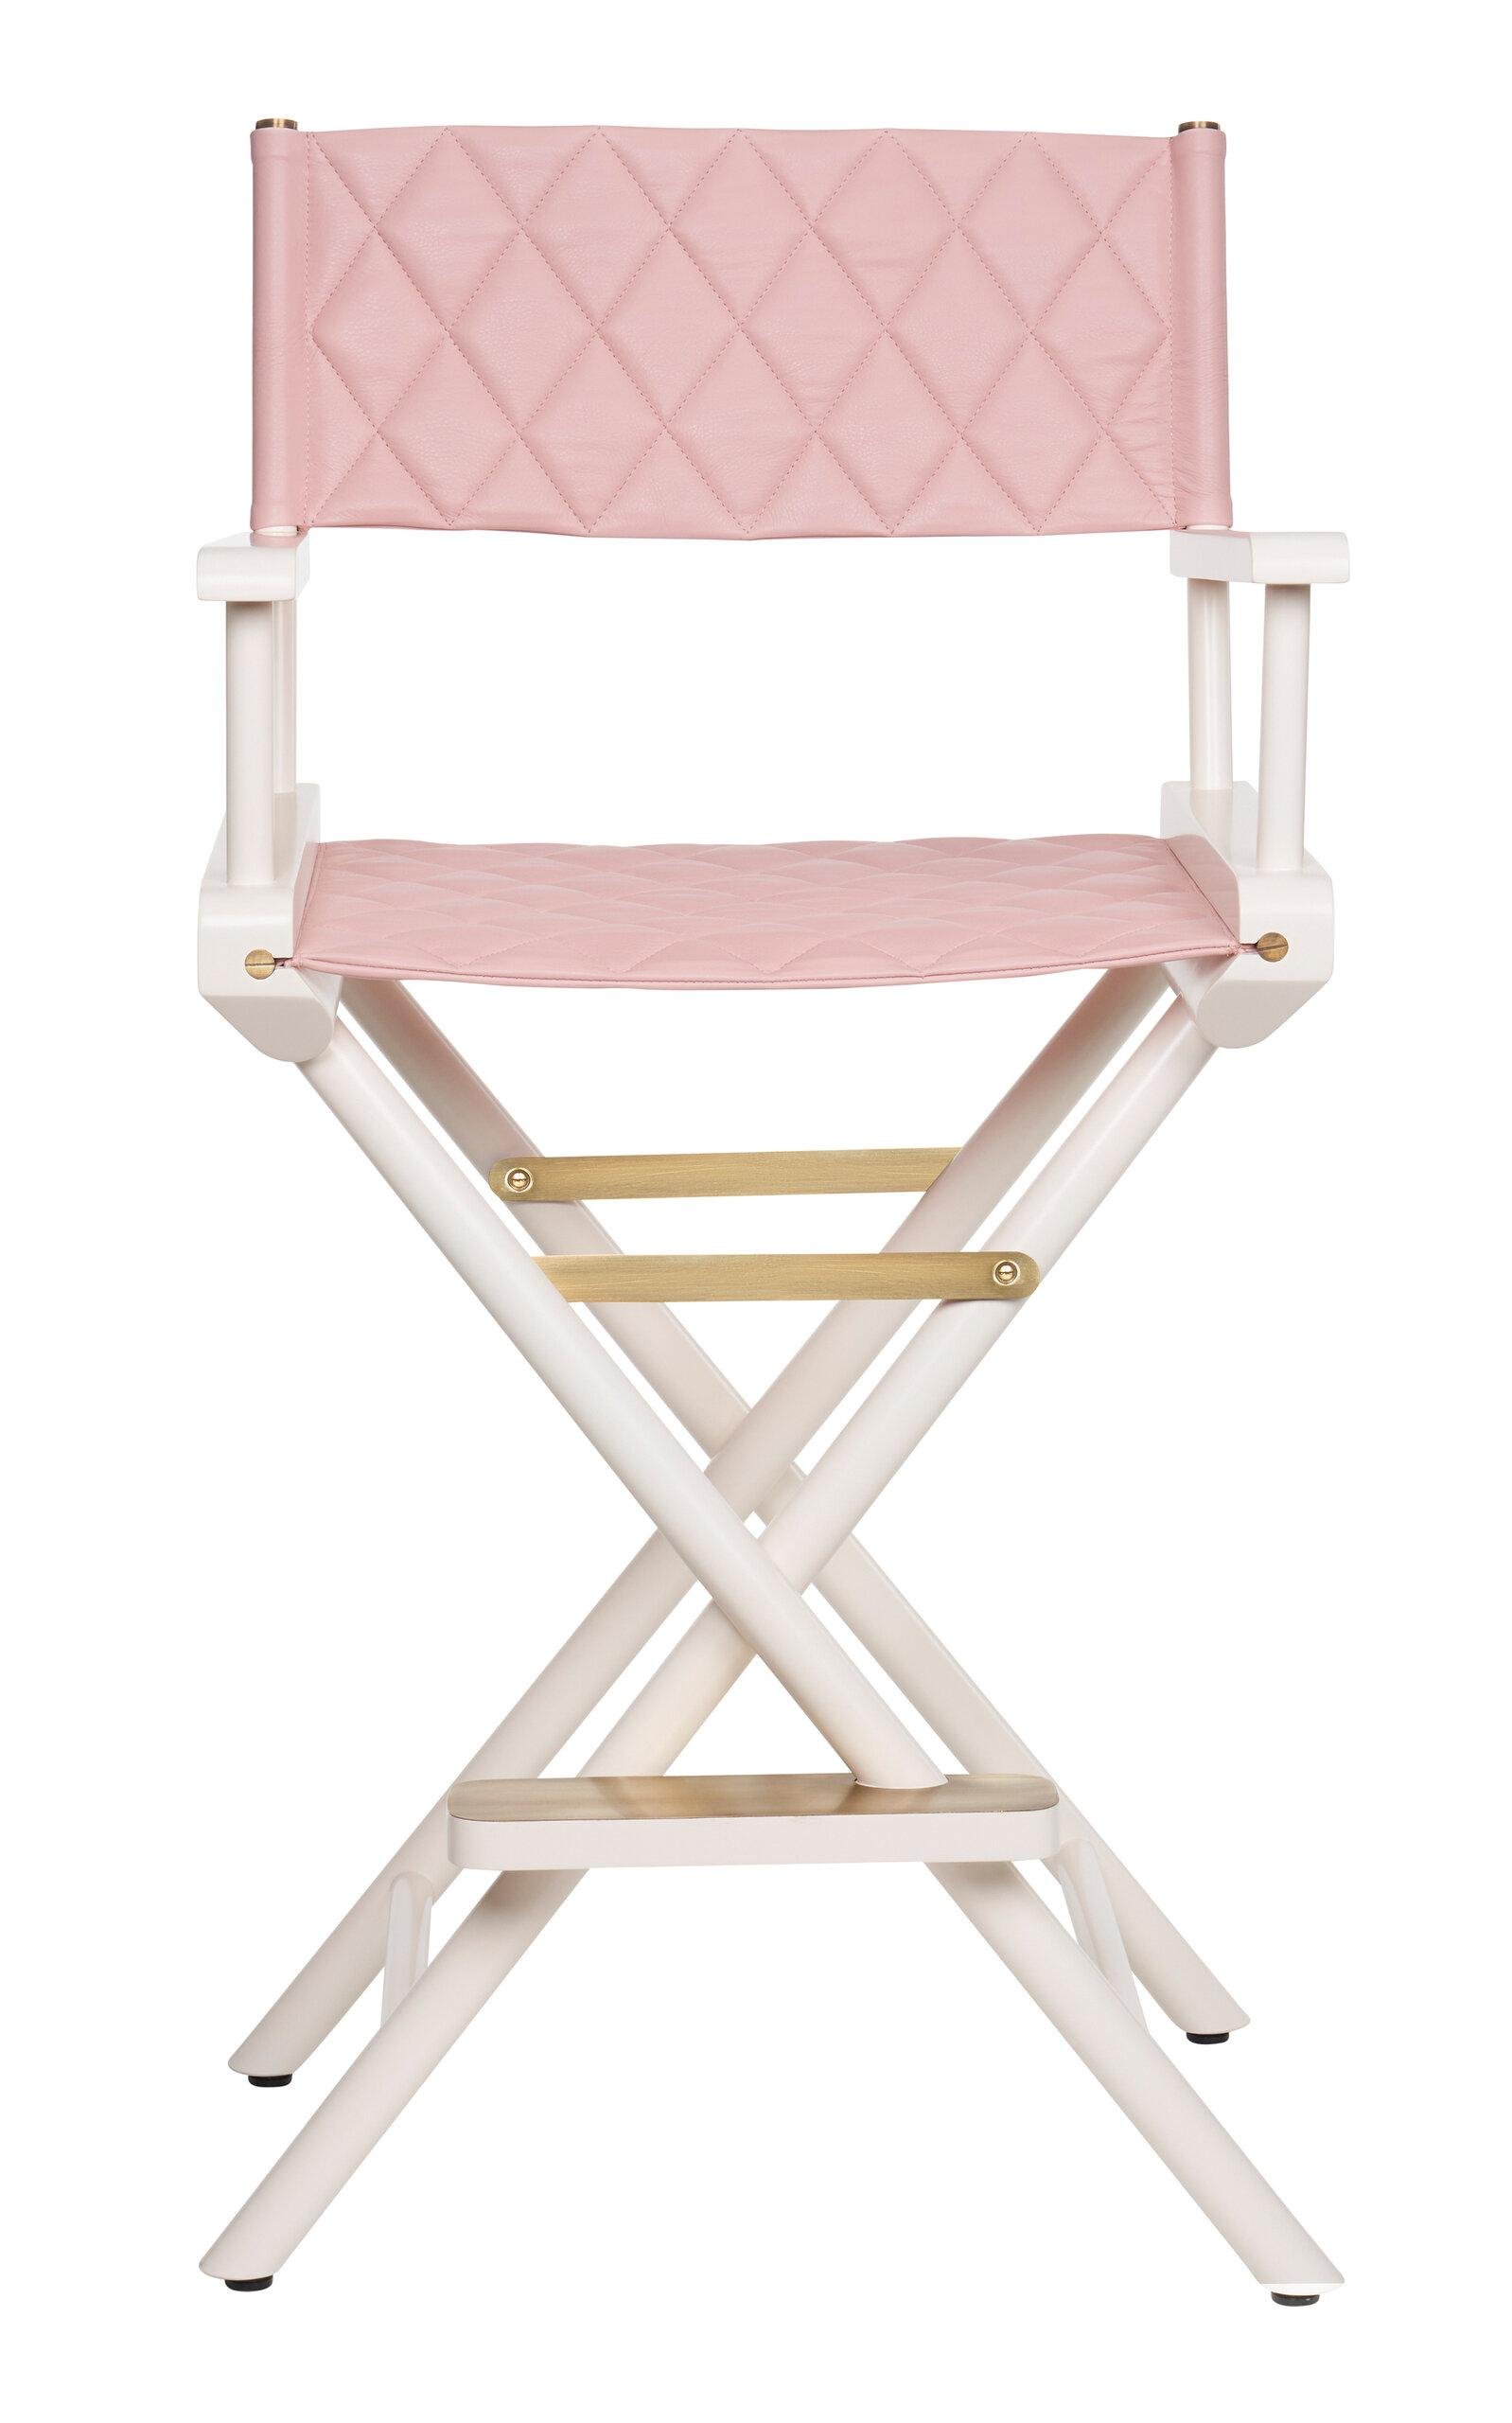 Stage 117 - The YUL: A Tall Director's Chair - Pink - Moda Operandi by STAGE 117